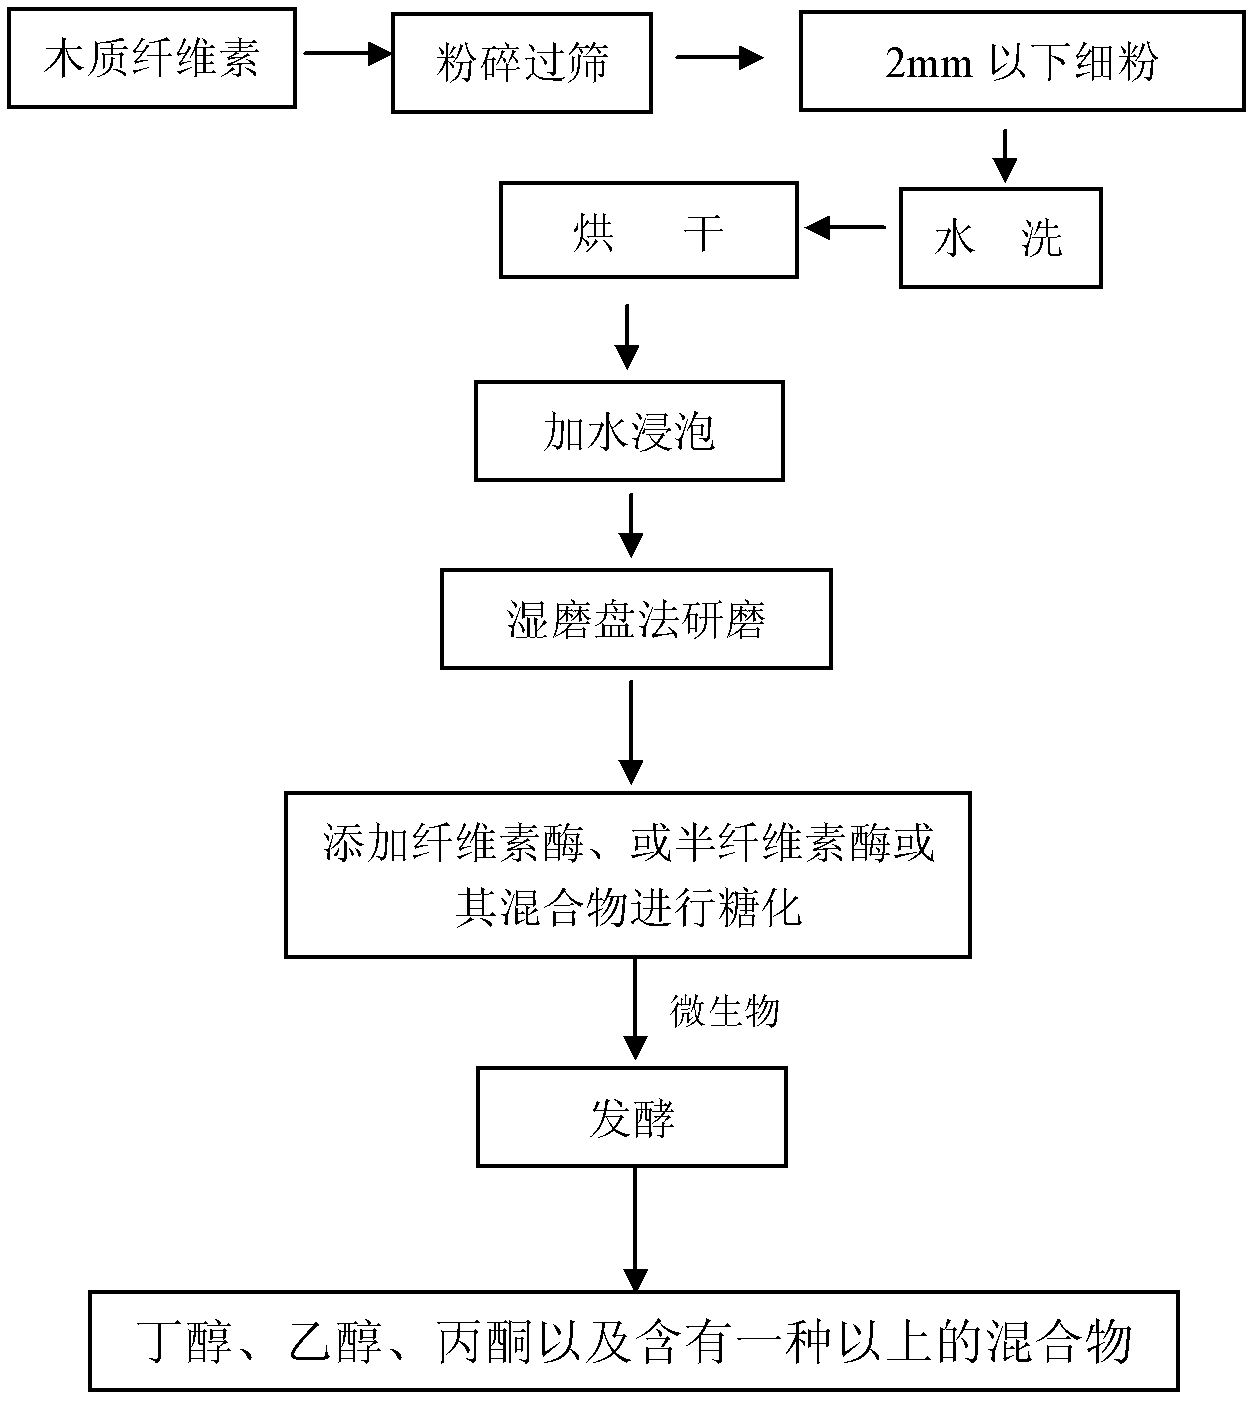 Method for producing ethanol or acetone and butanol by taking lignocellulose as raw material